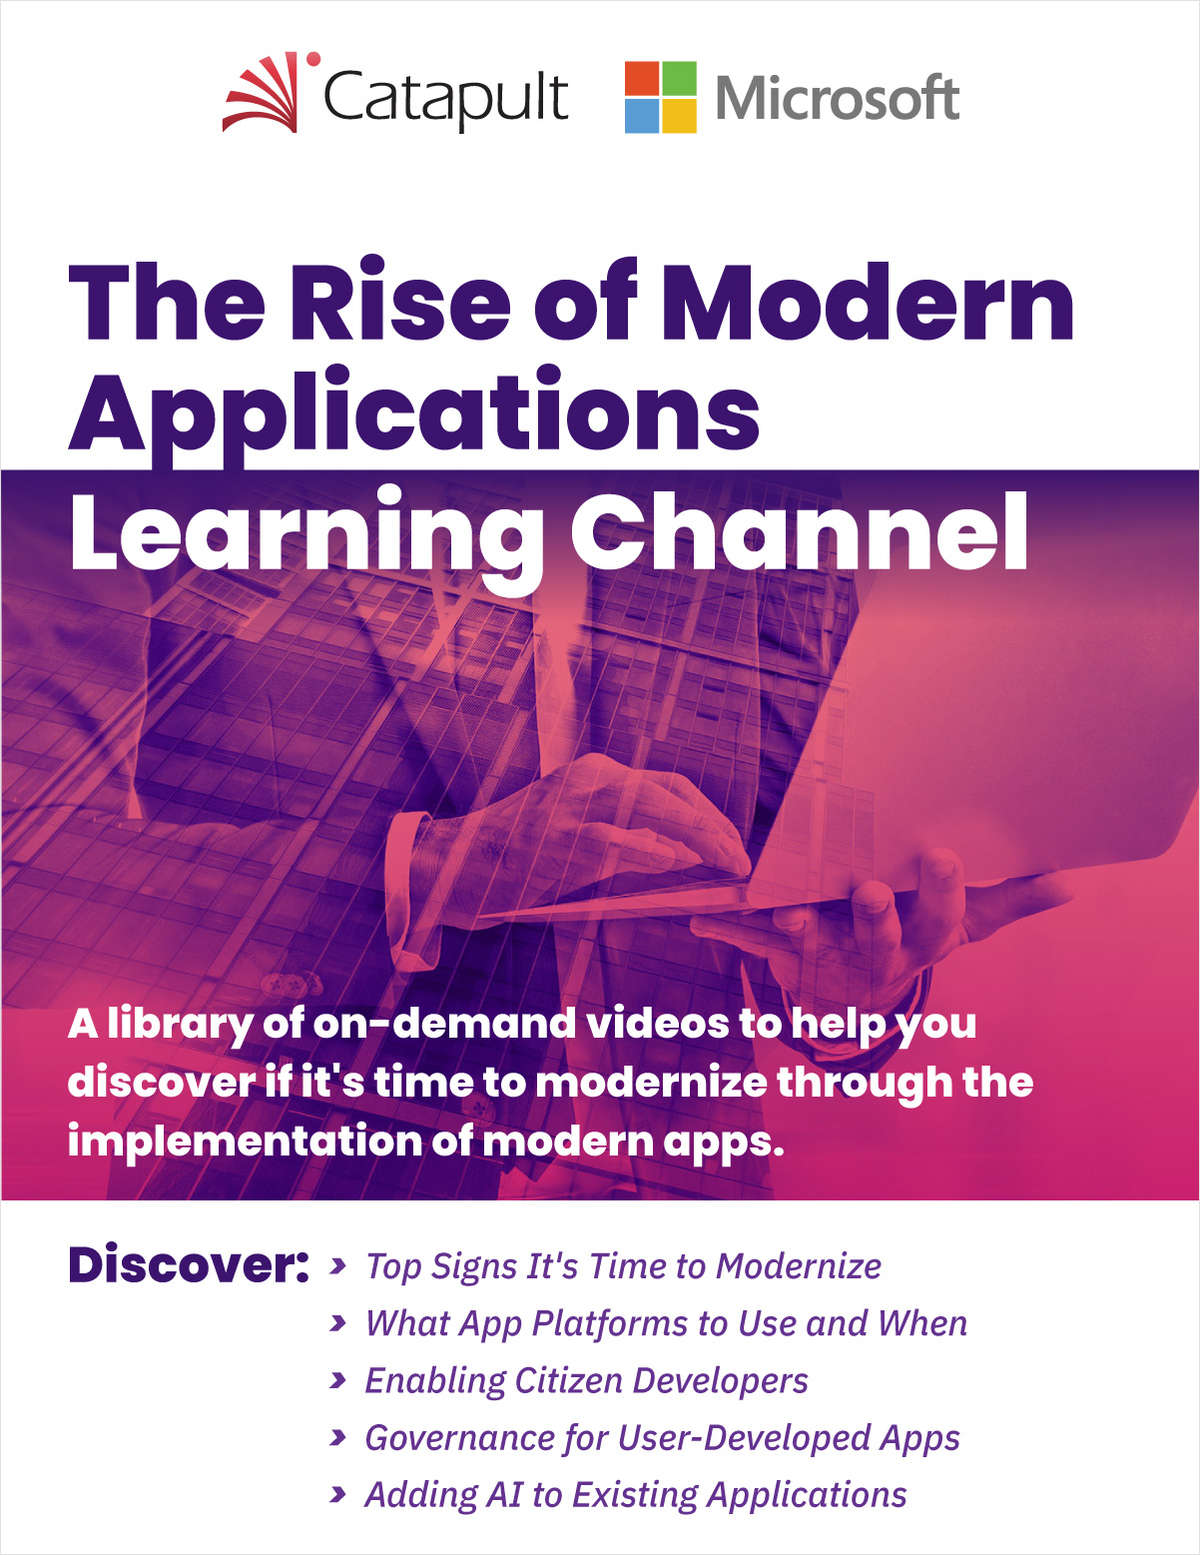 The Rise of Modern Applications [Learning Channel]